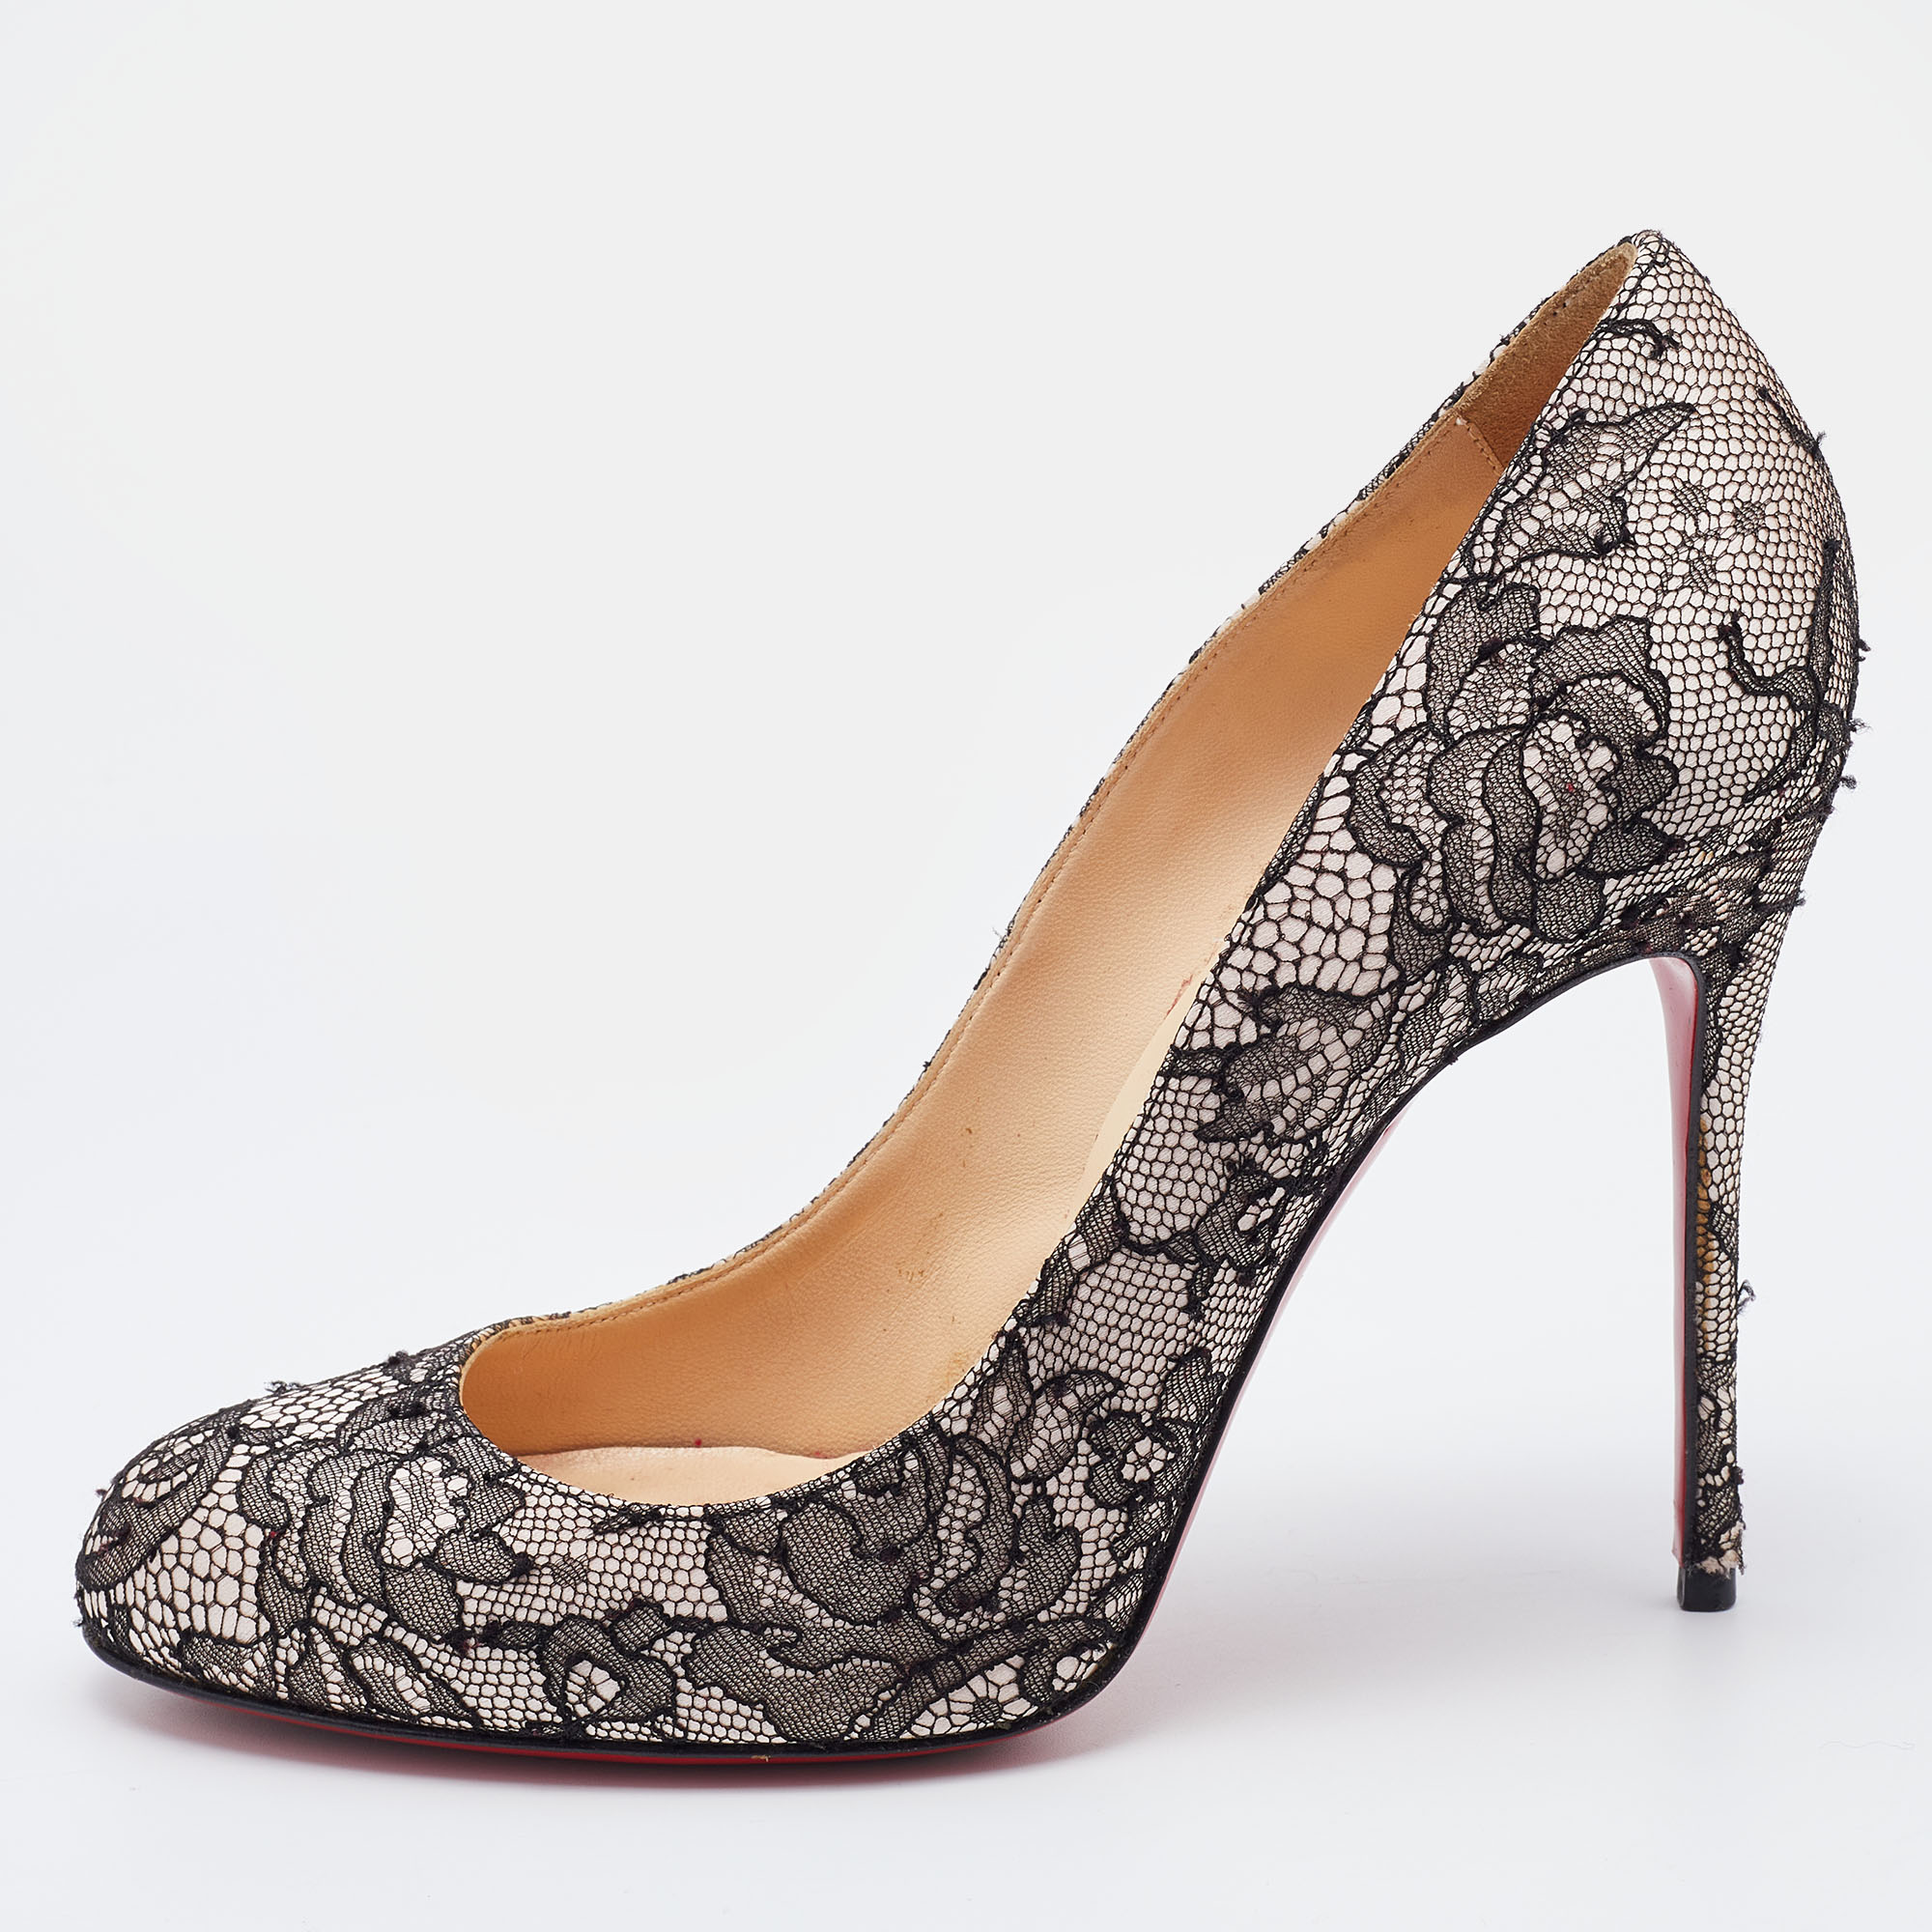 Christian louboutin black/beige lace and satin fifi round toe pumps size 39